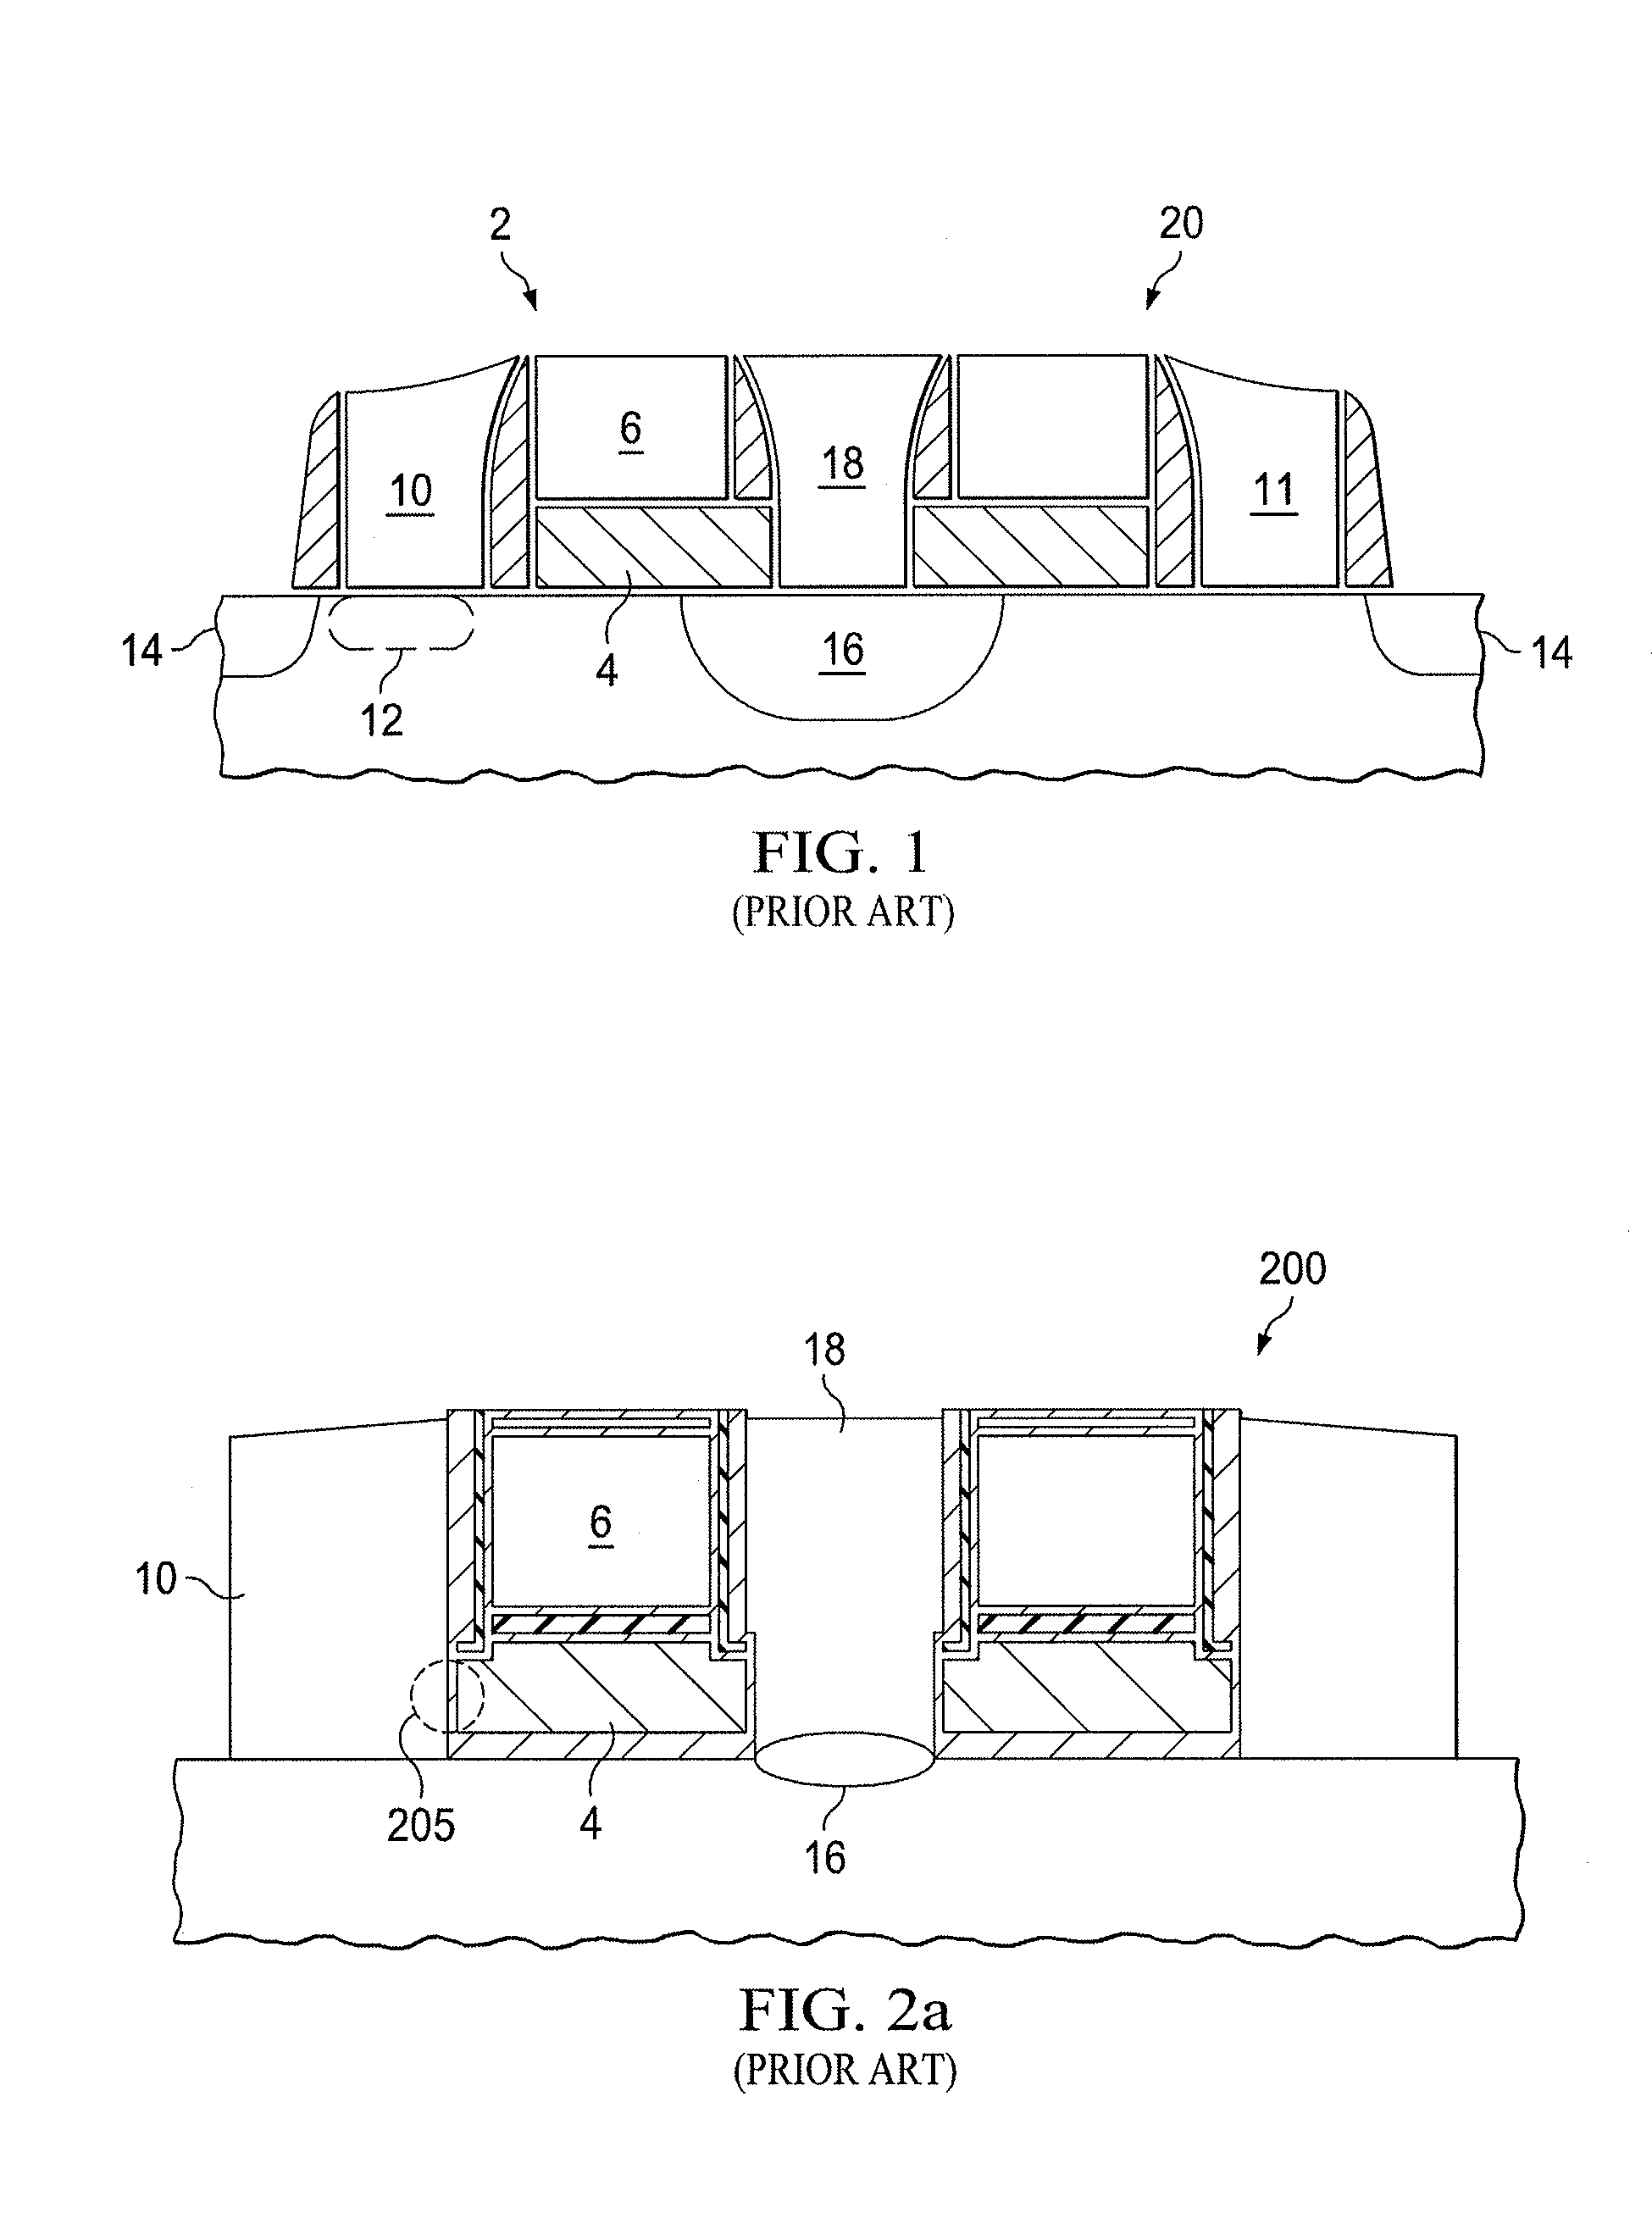 Structure for flash memory cells